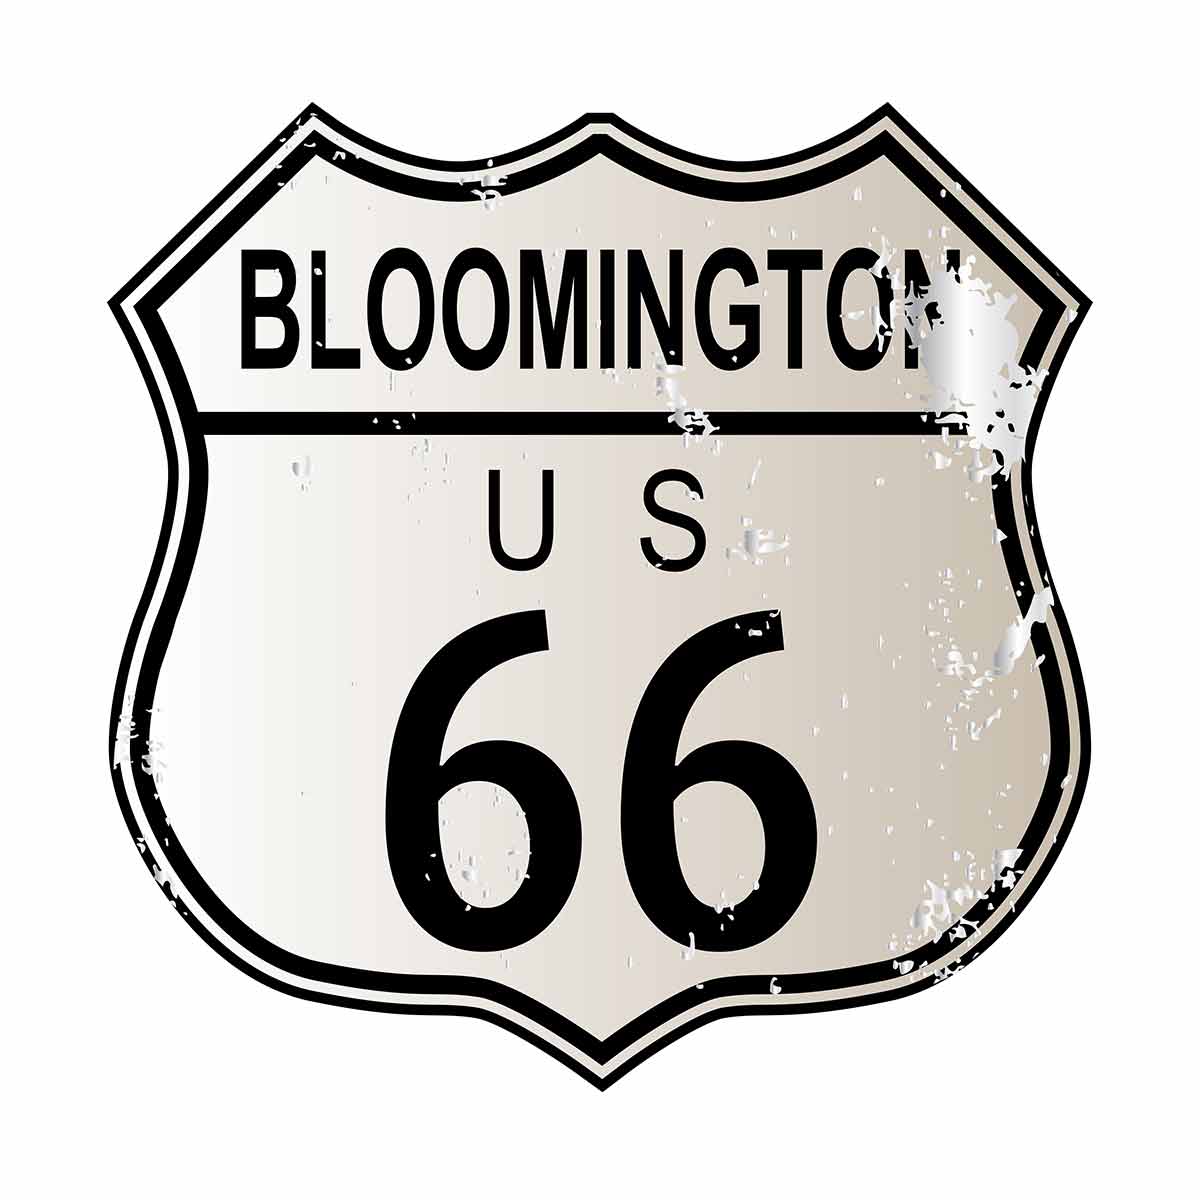 bloomington route 66 sign